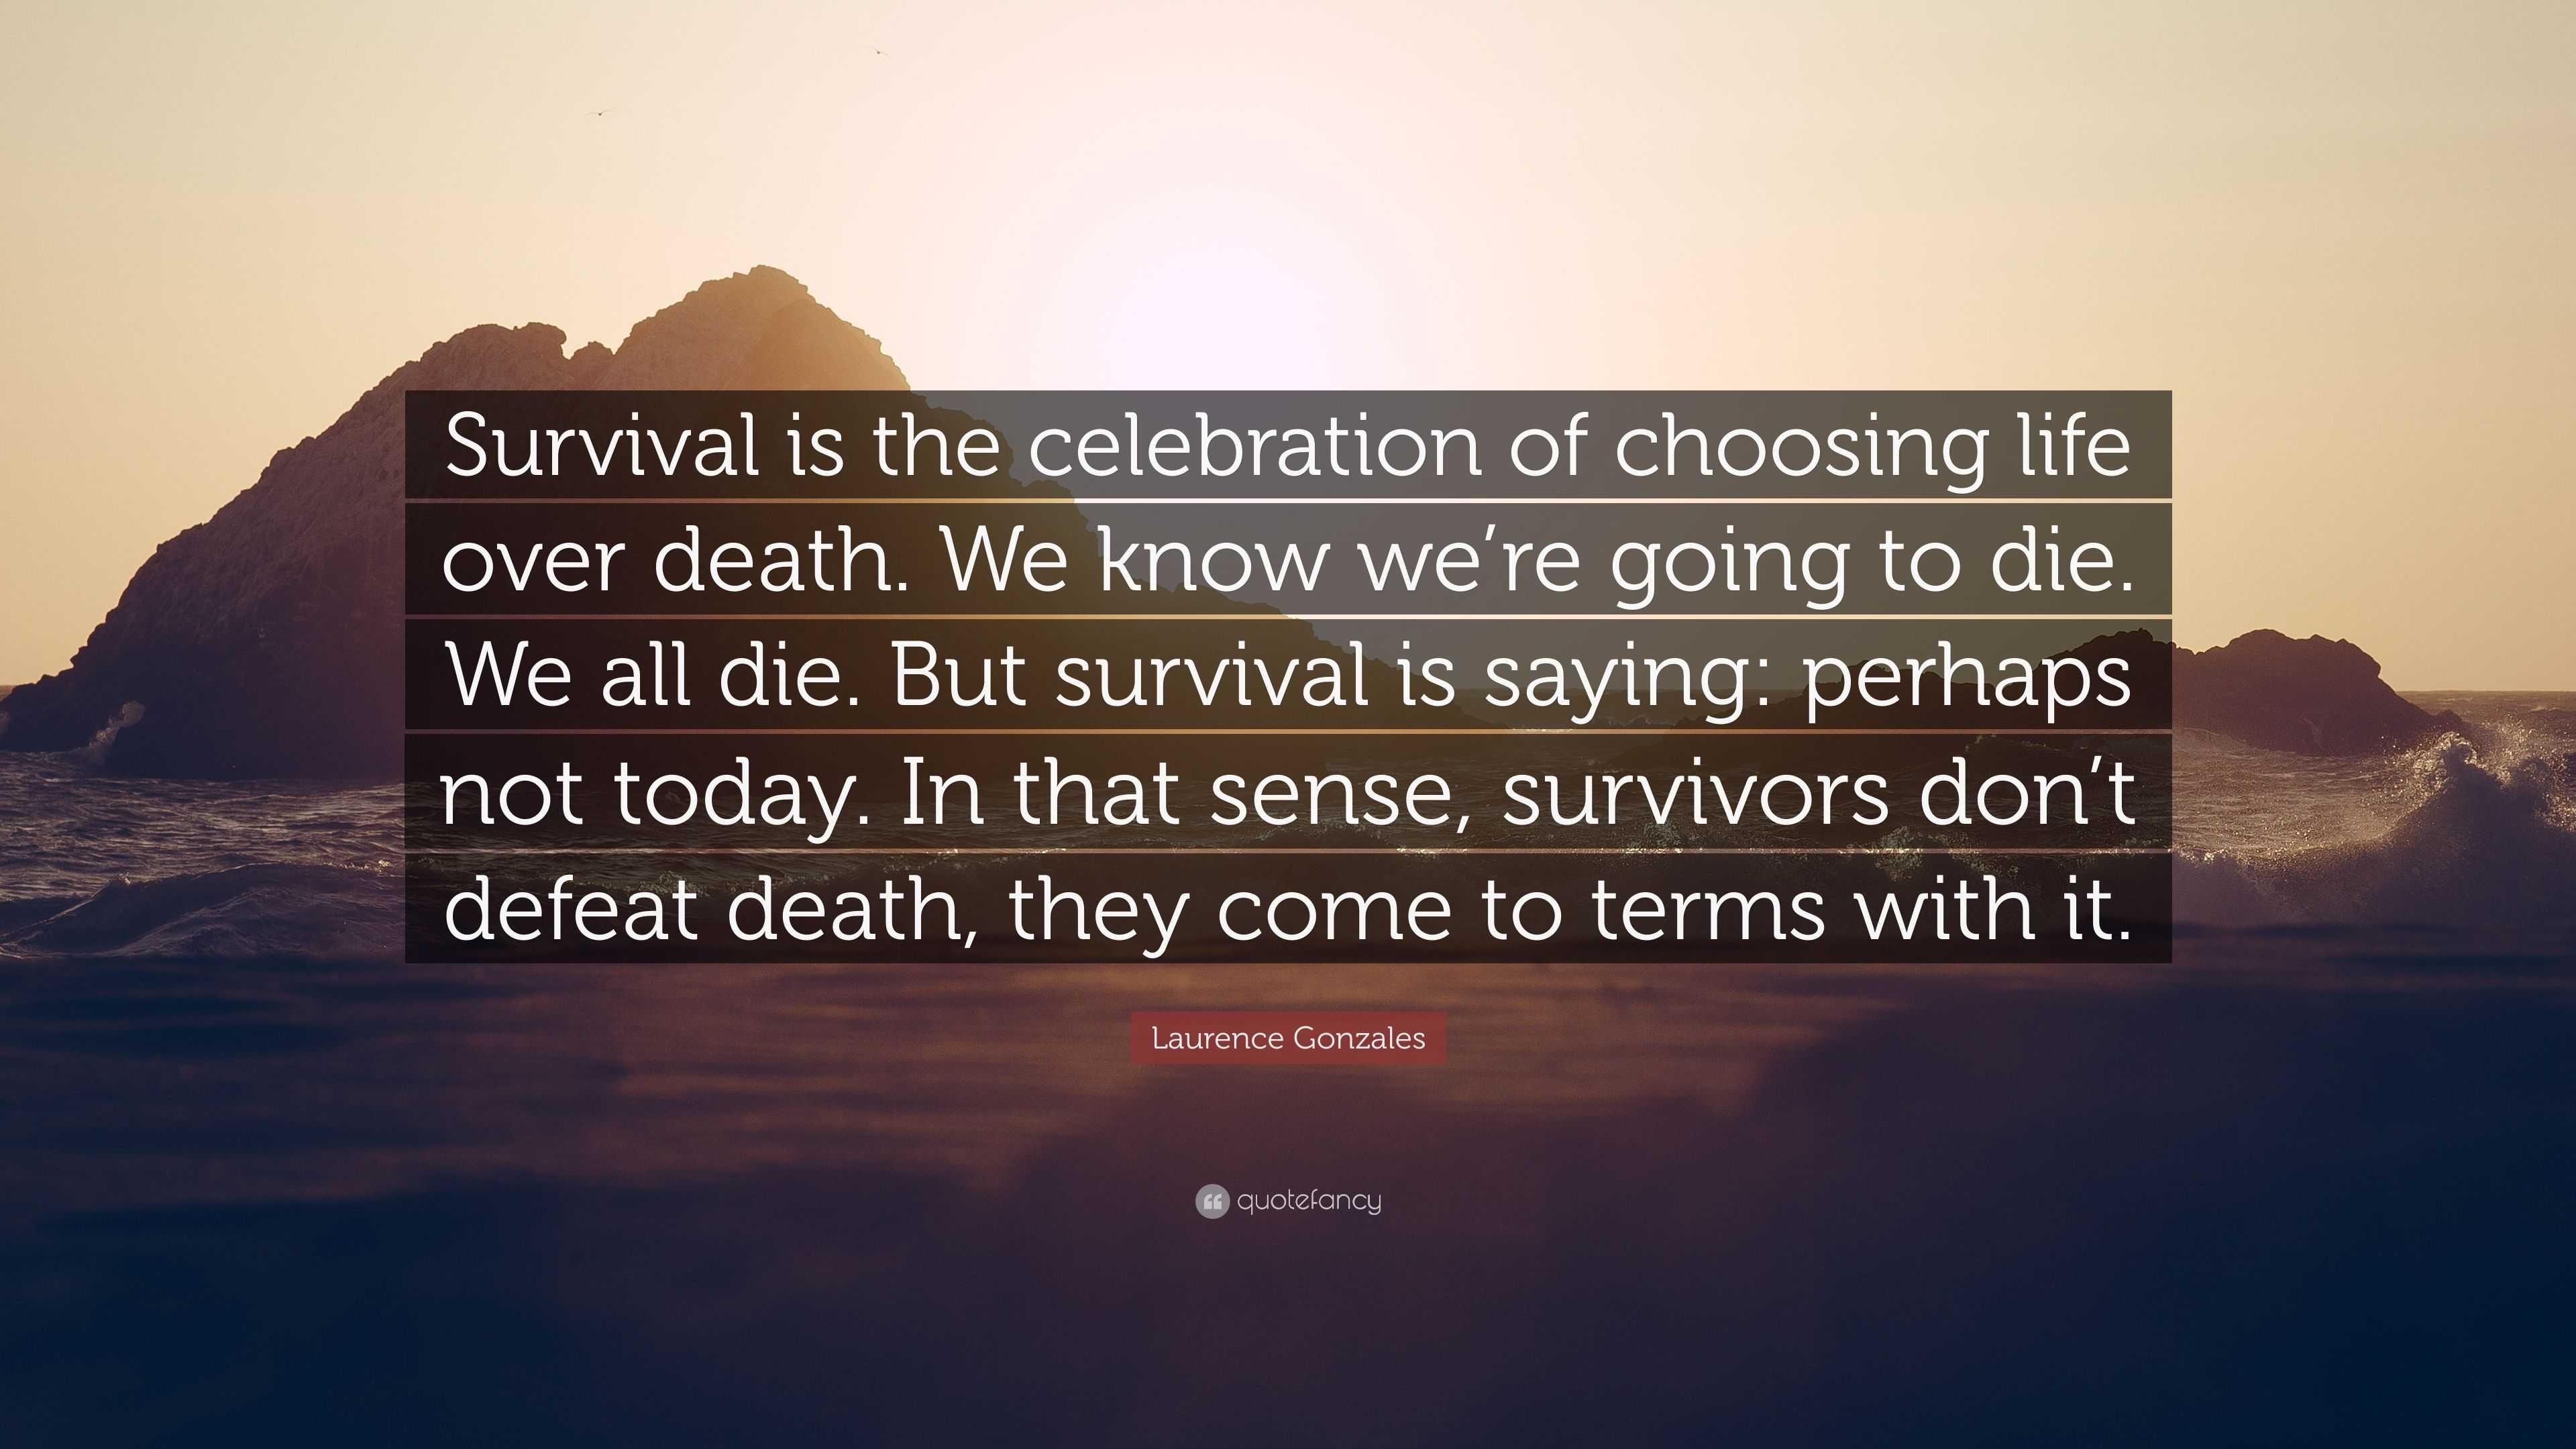 Life Over Death Quotes Quotes About Life